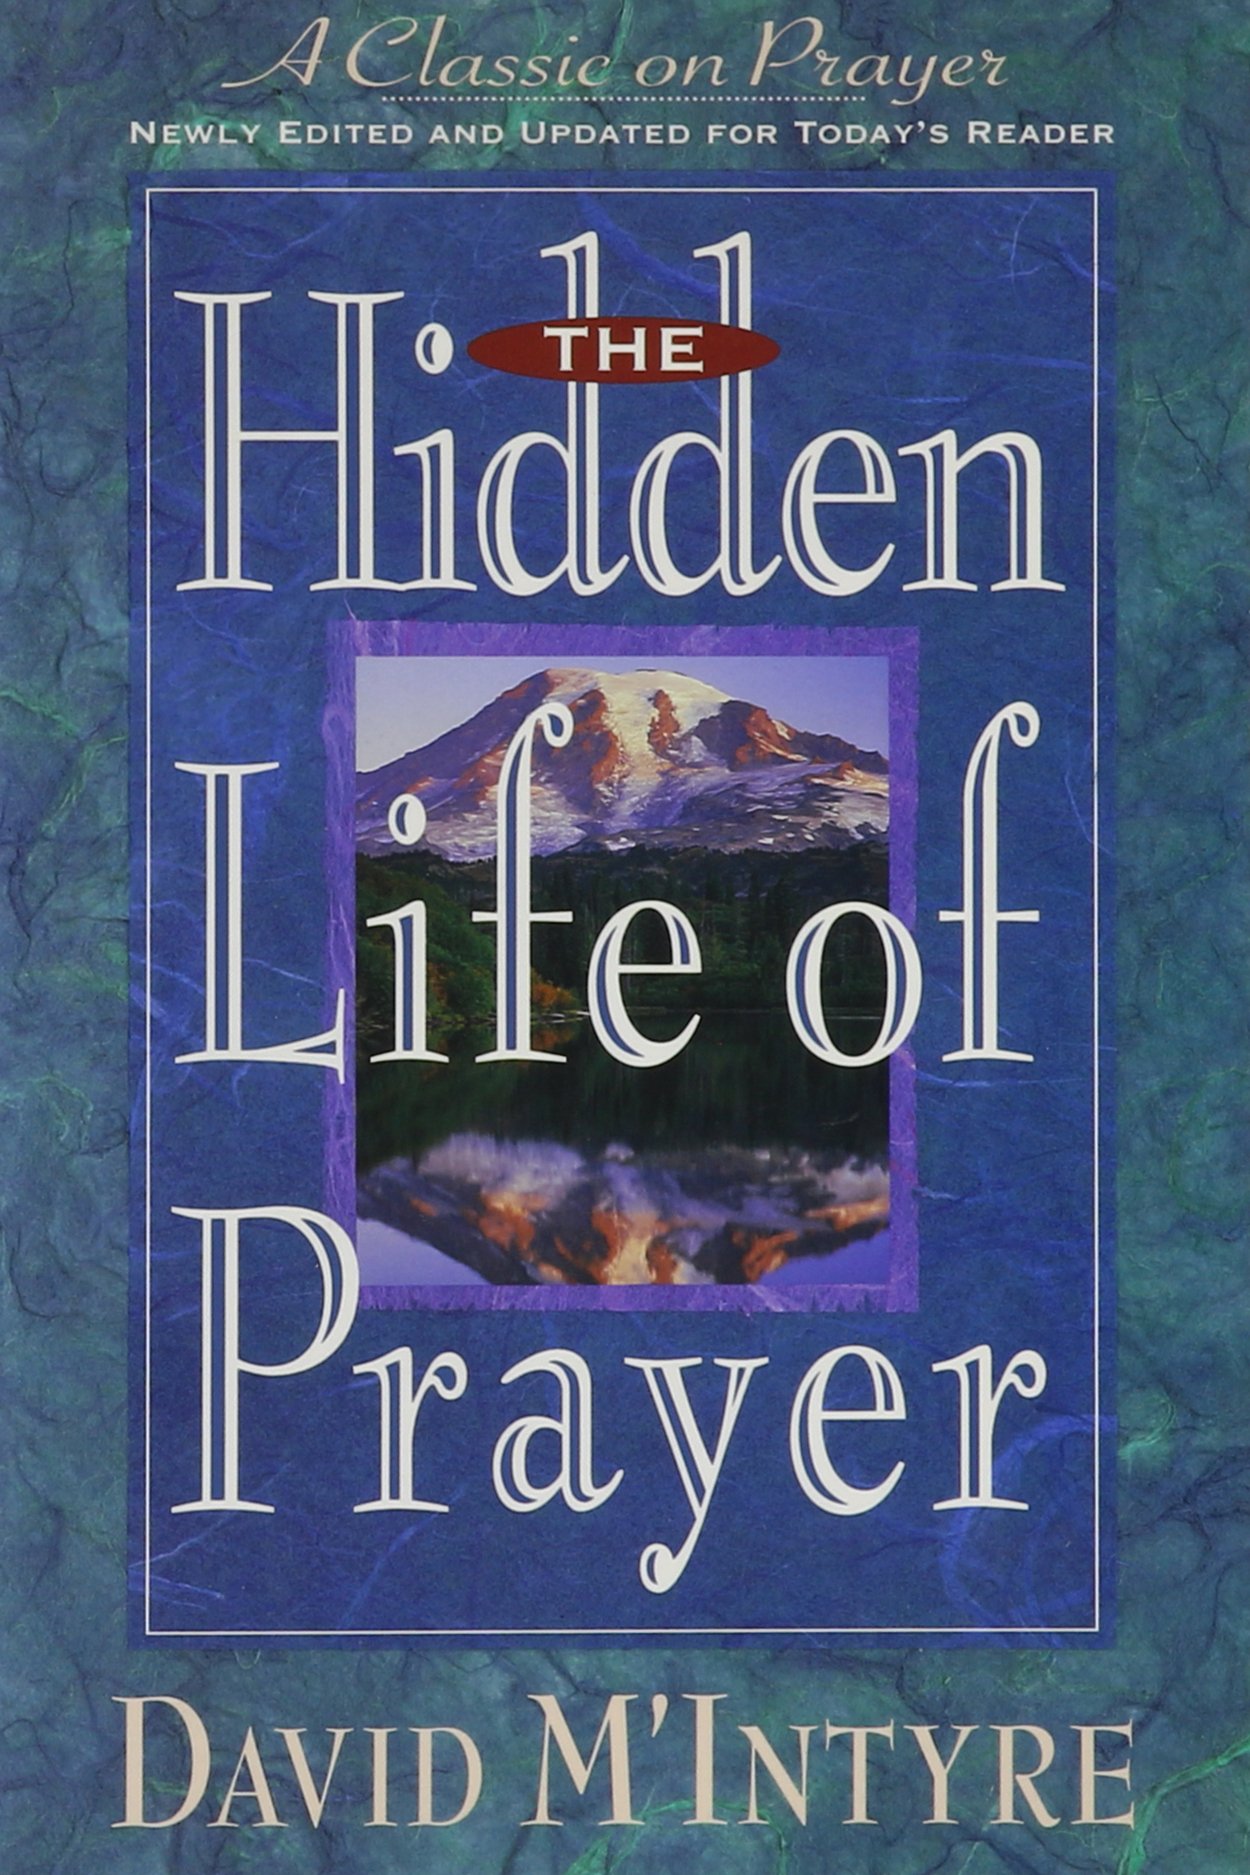 Image of The Hidden Life Of Prayer By David M'intyre